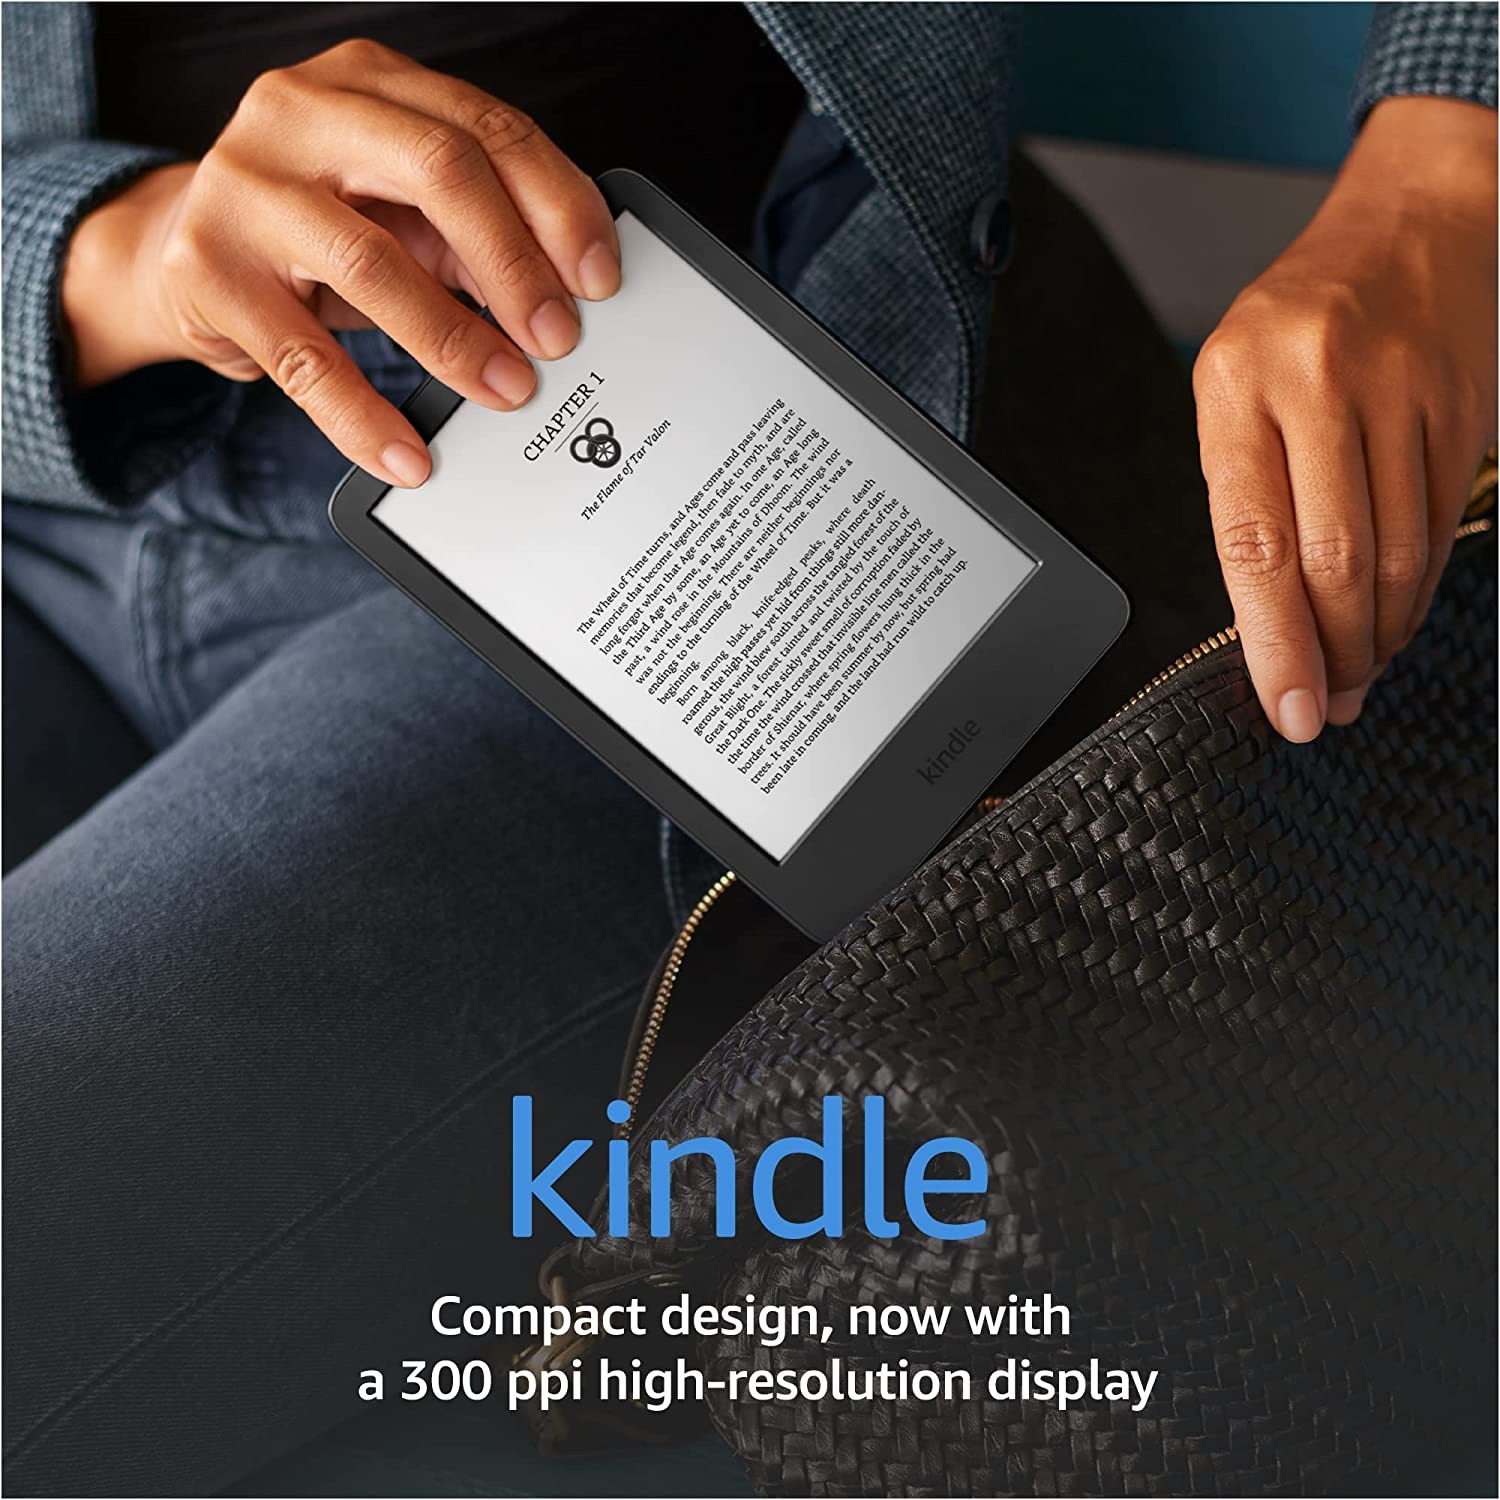 Kindle – The lightest and most compact Kindle, with extended battery life, adjus